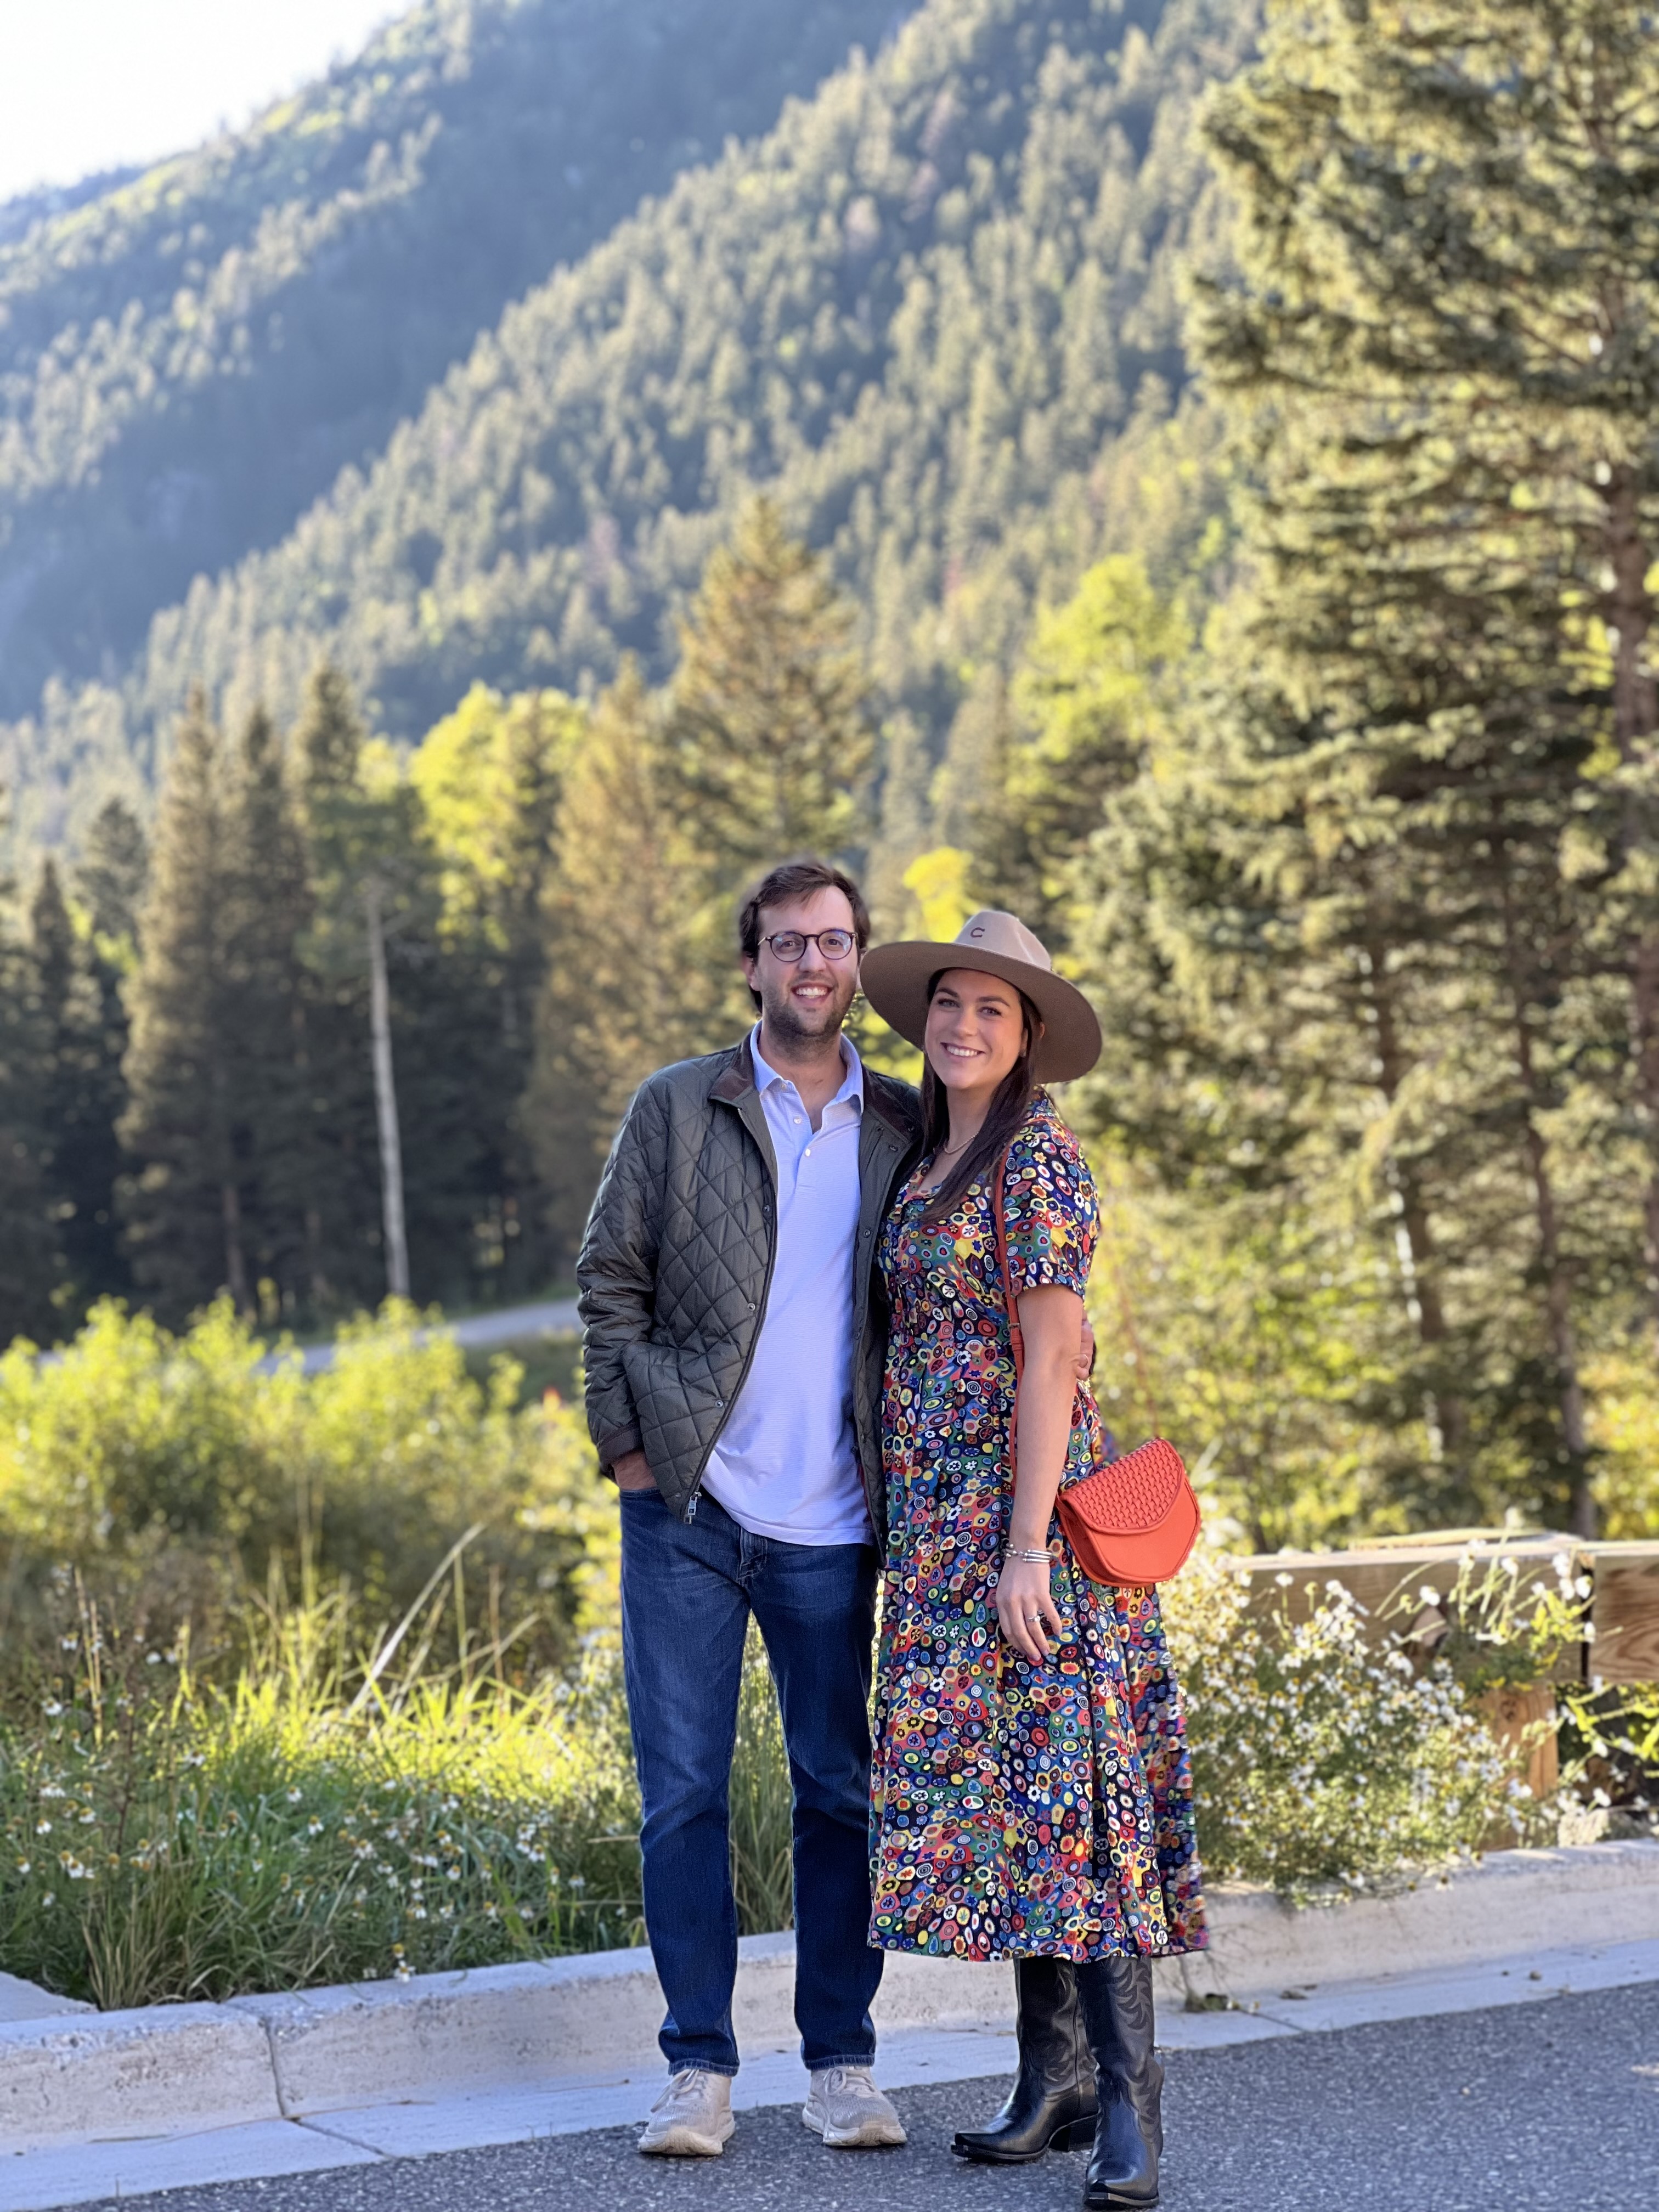 Grant Borelli and his wife pose in front of a mountainous landscape.